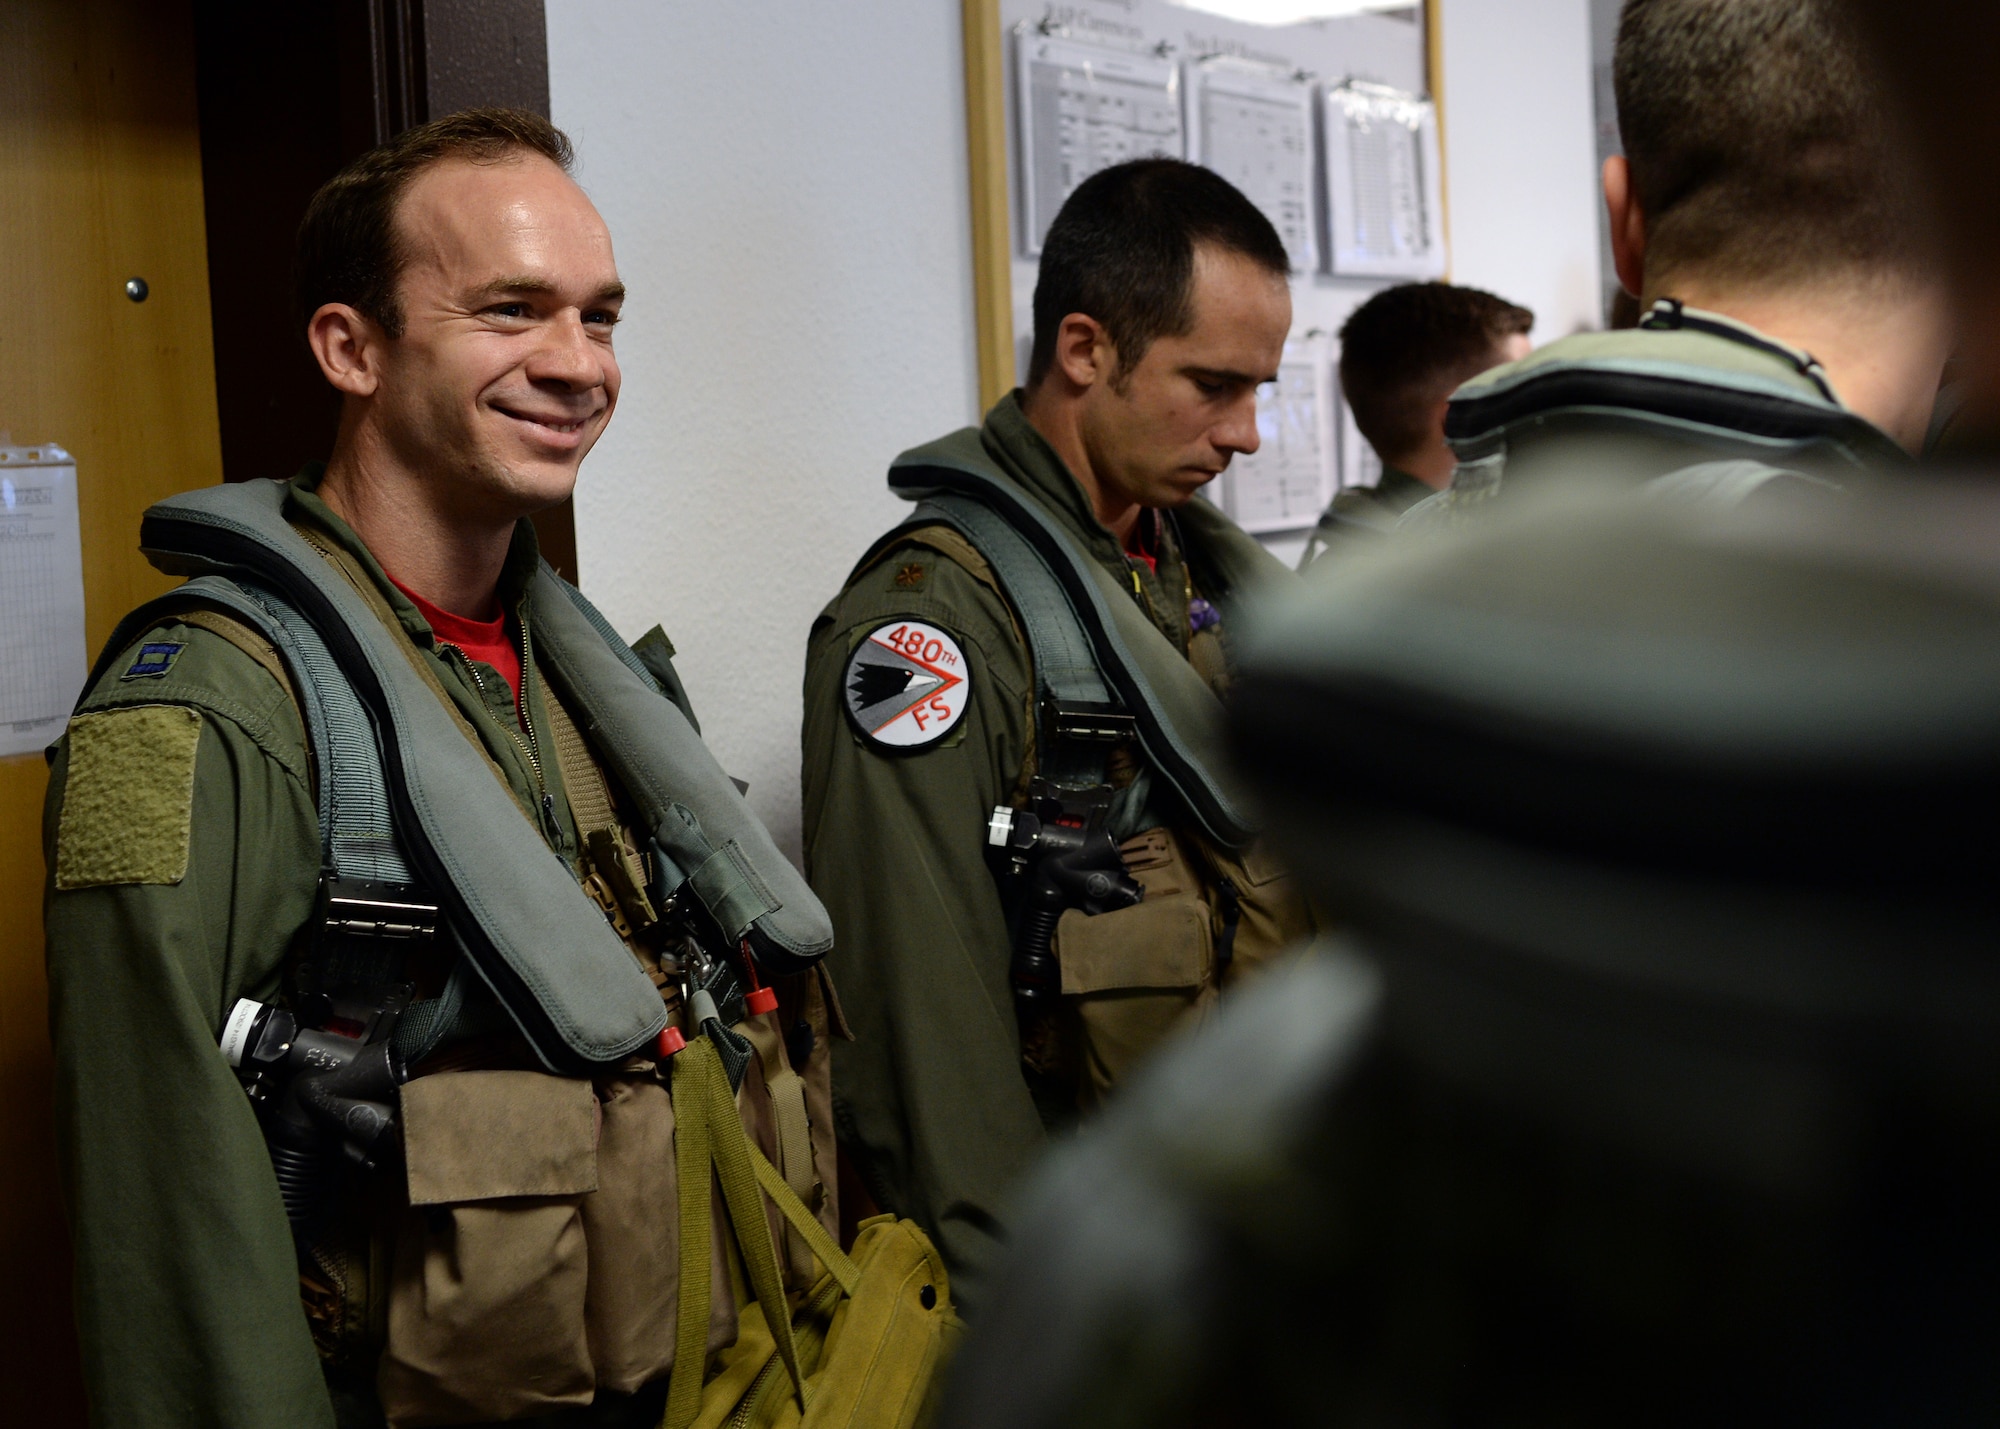 A U.S. Air Force F-16 Fighting Falcon fighter aircraft pilot from Spangdahlem Air Base, Germany, listens to his pre-flight brief Aug. 8, 2014, before flying to Souda Bay, Greece, for a two-week training event with the Hellenic air force. NATO partners and allies train continuously throughout year to ensure their compatibility if called to act in support of regional peace and stability. (U.S. Air Force photo by Staff Sgt. Daryl Knee/Released)